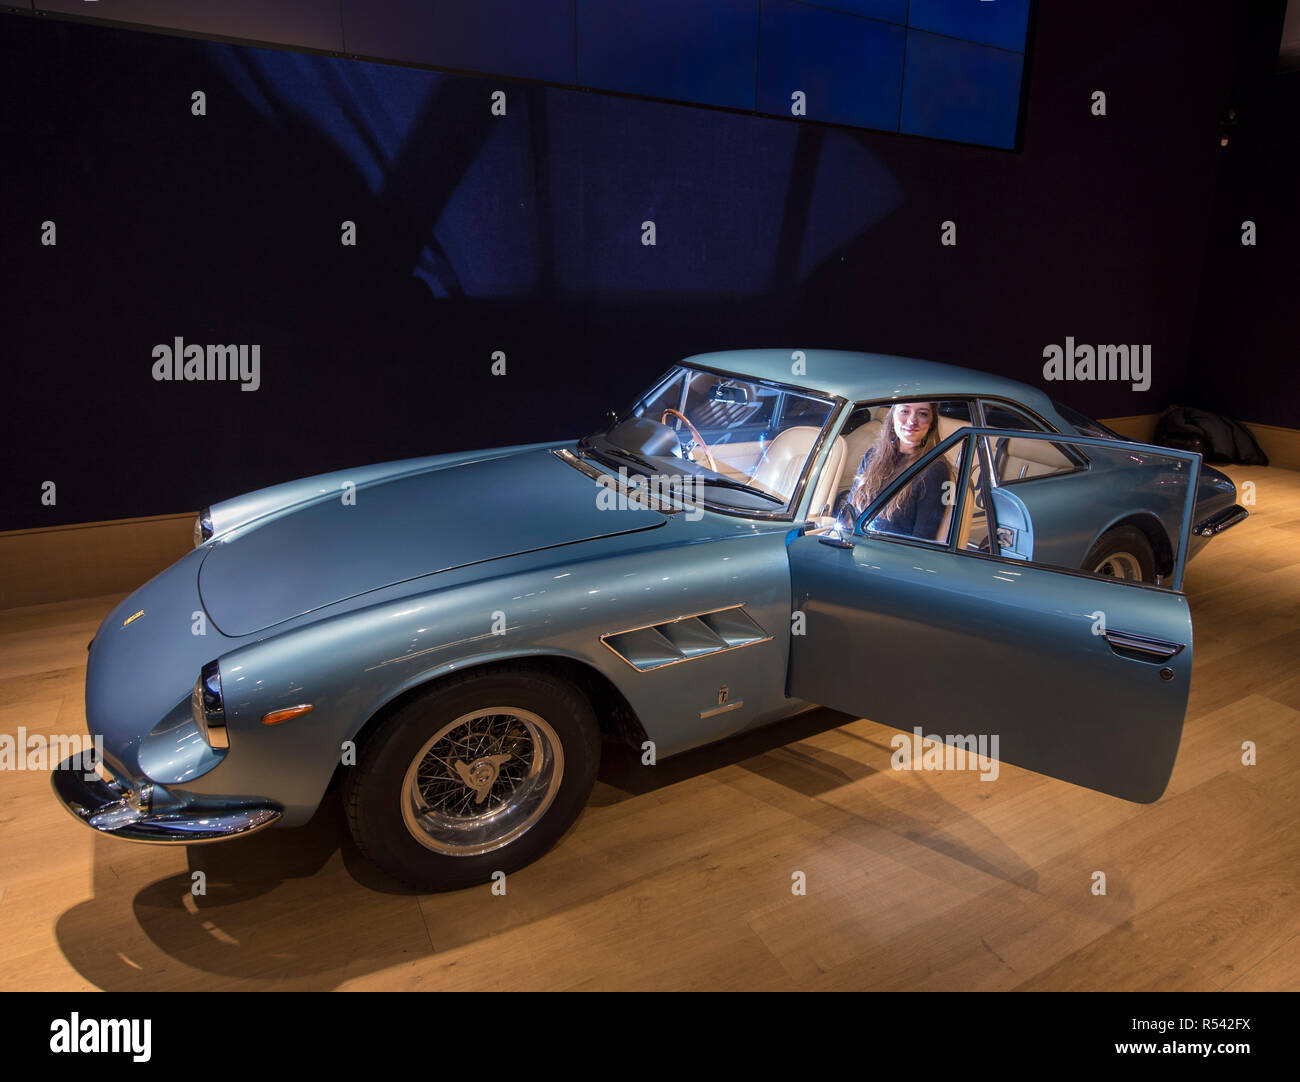 Bonhams, New Bond Street, London, UK. 29 November 2018. Historic Jaguar racing cars arrive at Bonhams in central London alongside other high-performance racing cars and exceptional road cars. Highlights include a Le Mans class-winning Jaguar XJ220C driven by David Coulthard (£2,200,000-2,800,000), Lister Jaguar Knobbly (£2,200,000-2,800,000). The sale takes place on 1st December 2018. Image: 1966 Ferrari 500 Superfast Series II Coupé, estimate £1,300,000-1,400,000. Credit: Malcolm Park/Alamy Live News. Stock Photo